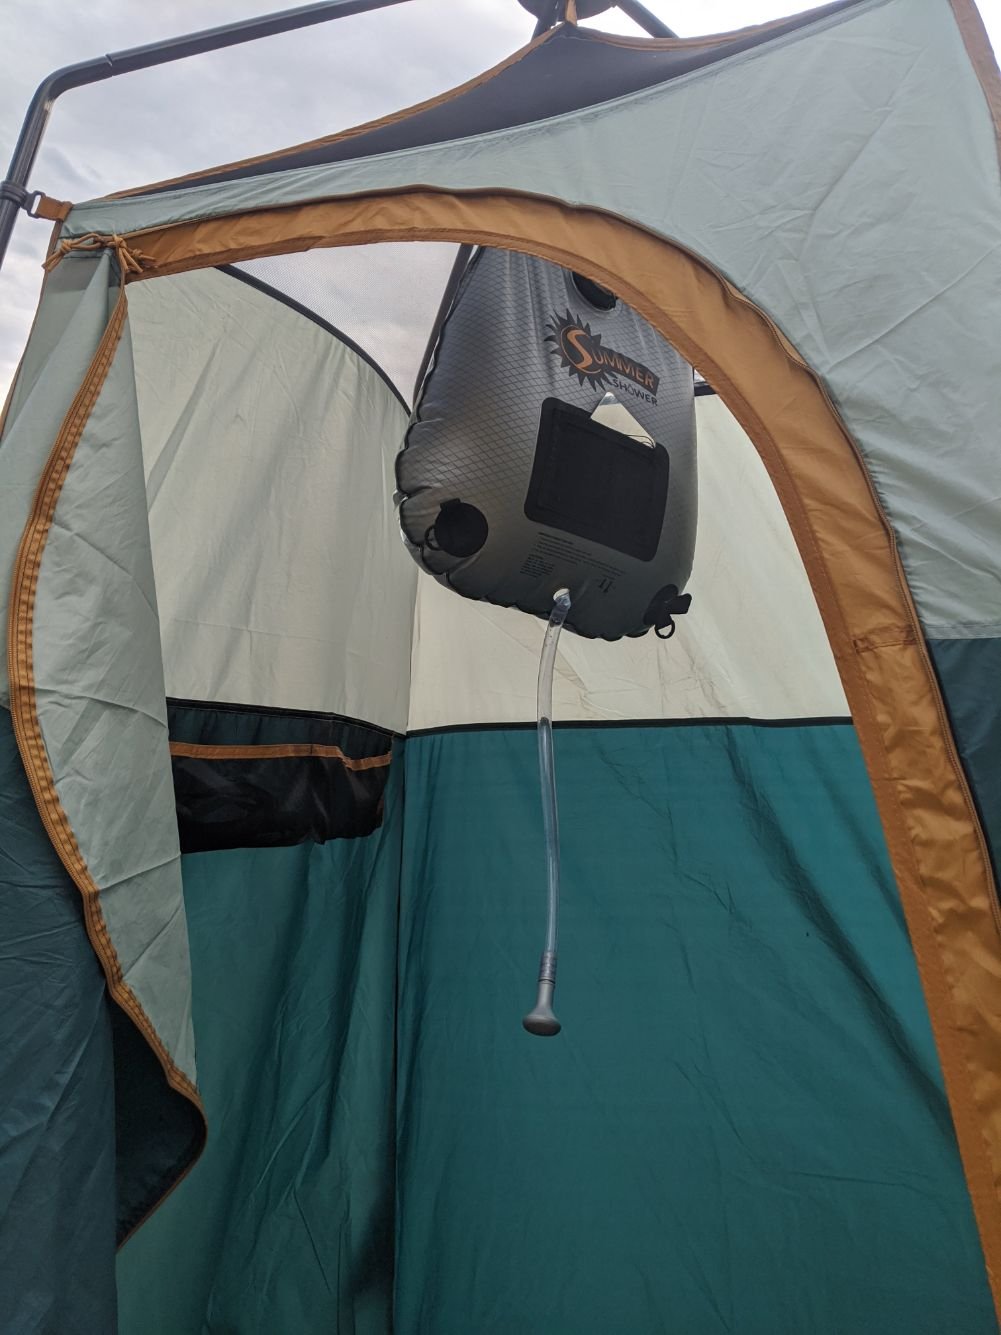 Best Portable Showers for Camping of 2021